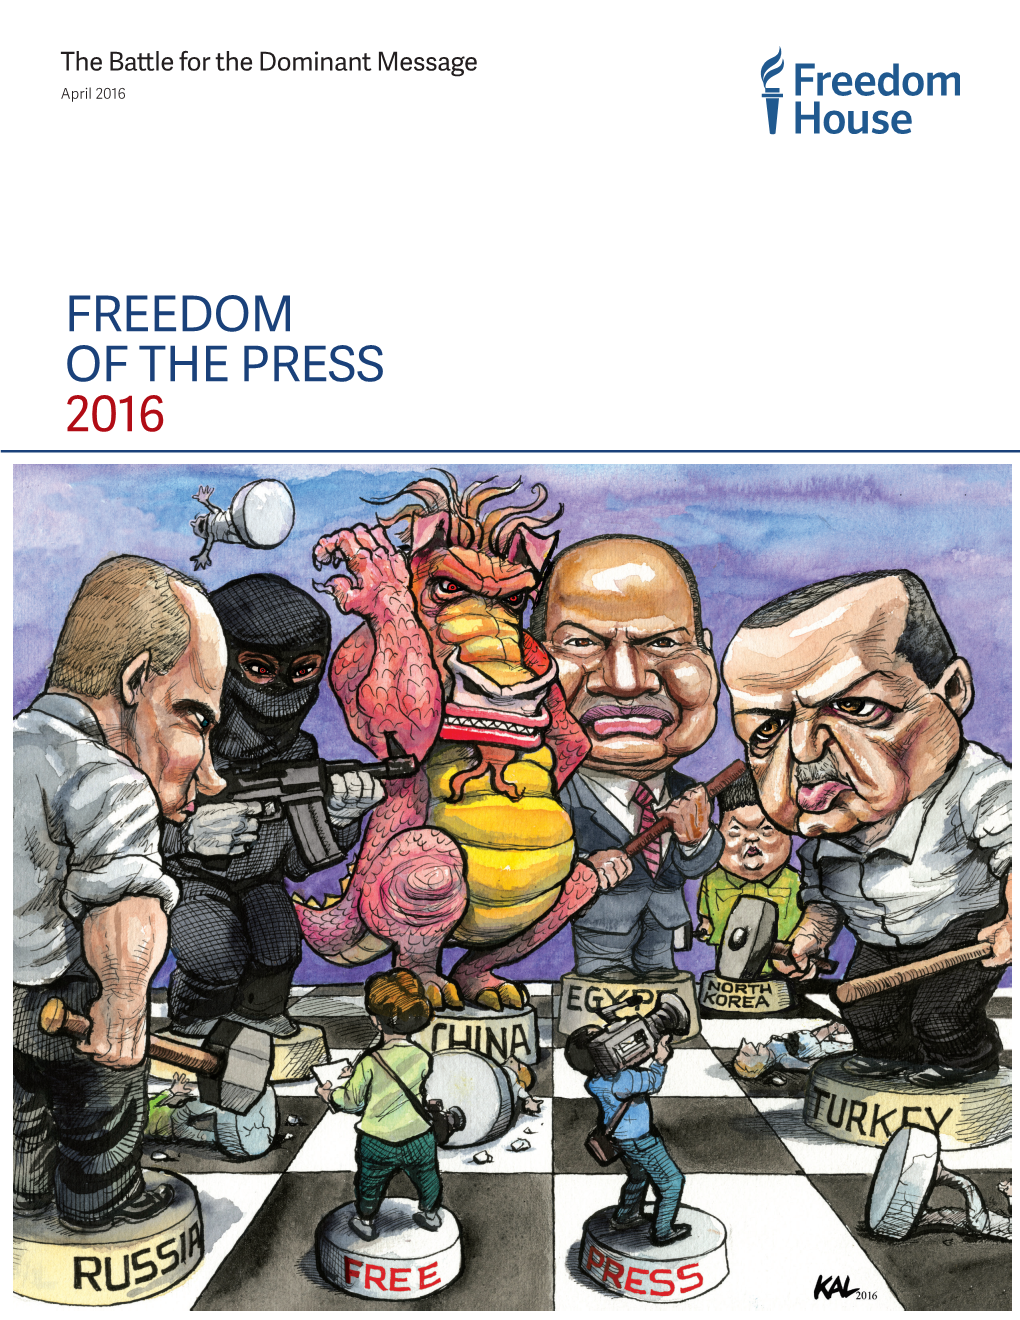 FREEDOM of the PRESS 2016 Contents